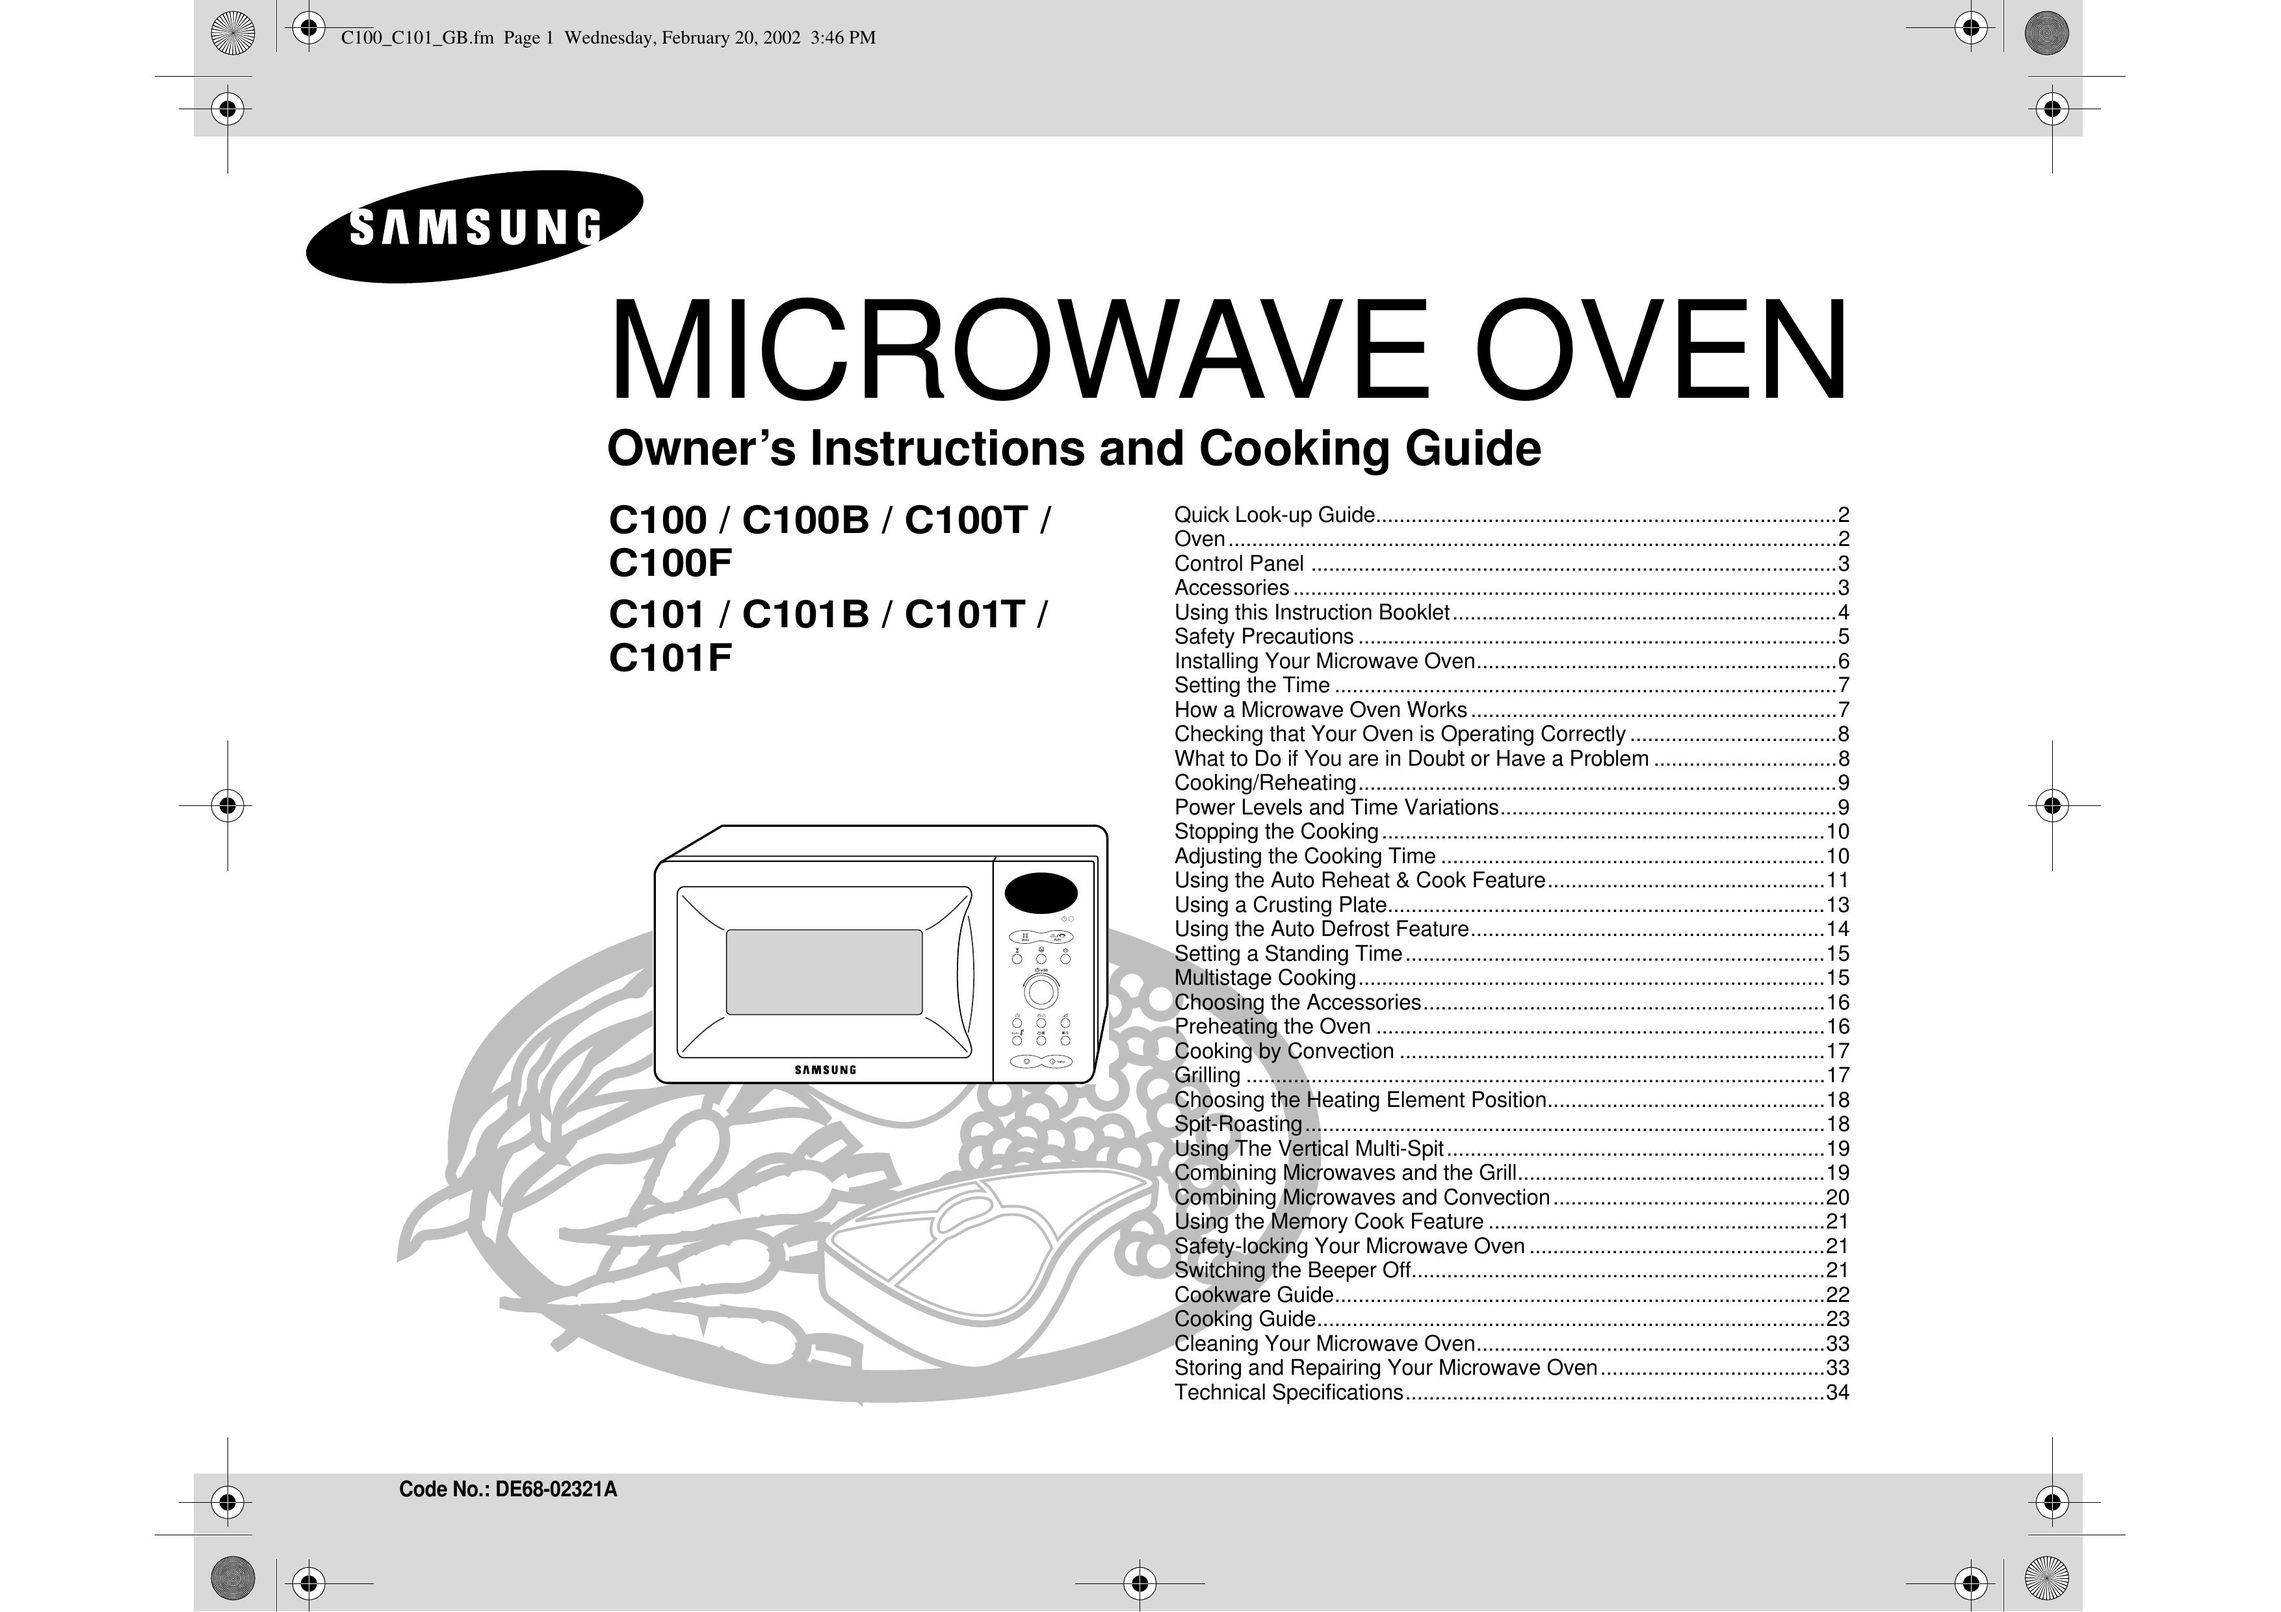 Samsung C101F Microwave Oven User Manual